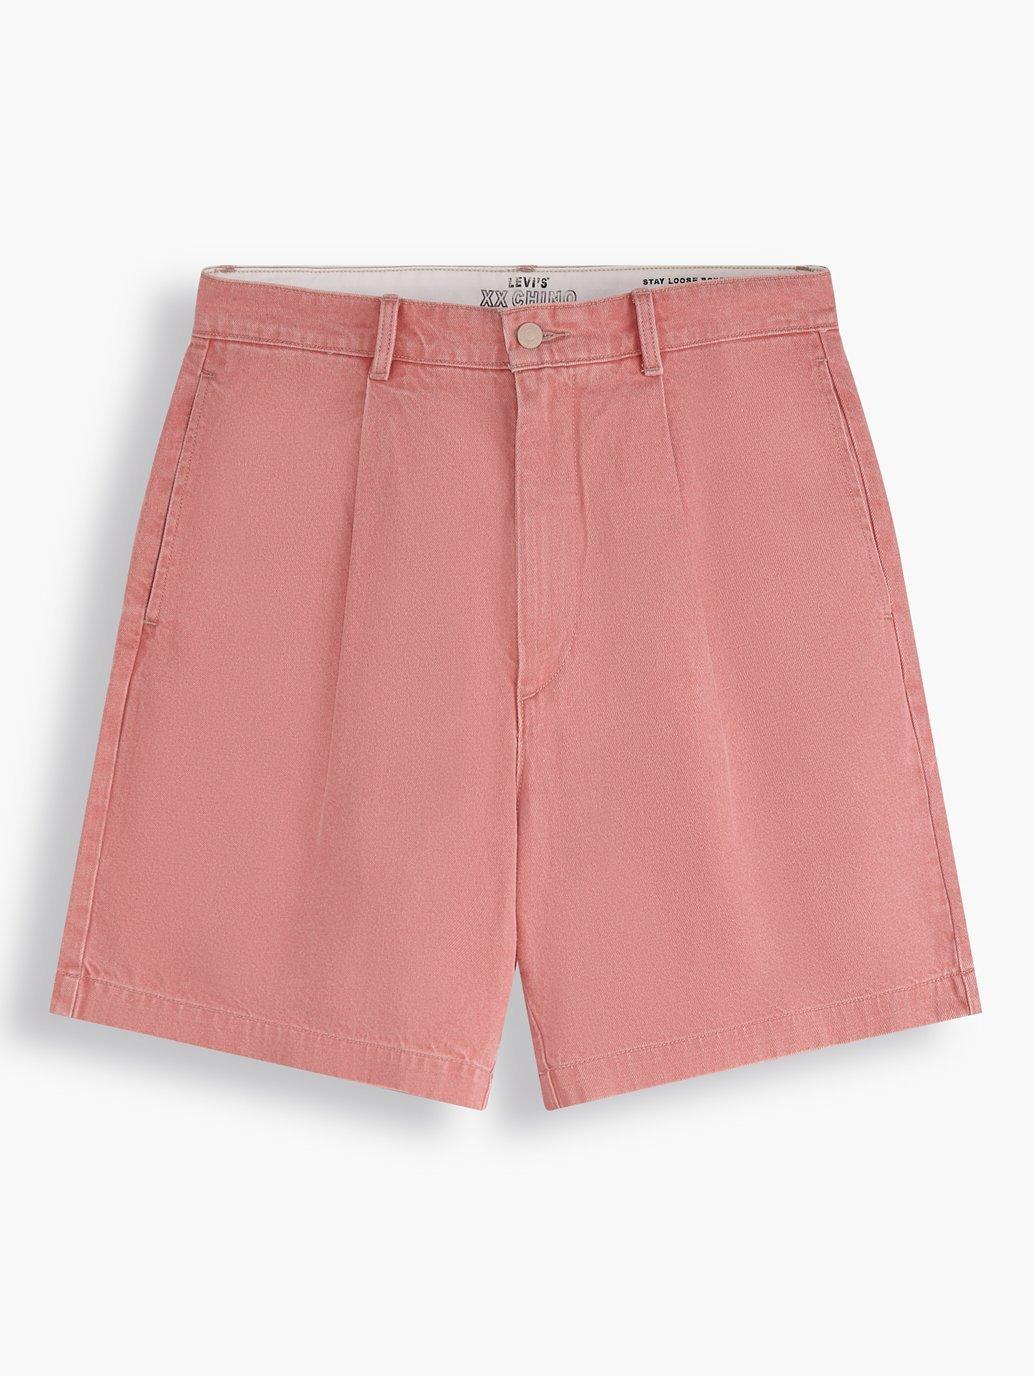 levis singapore mens xx chino pleated shorts A22520004 21 Details